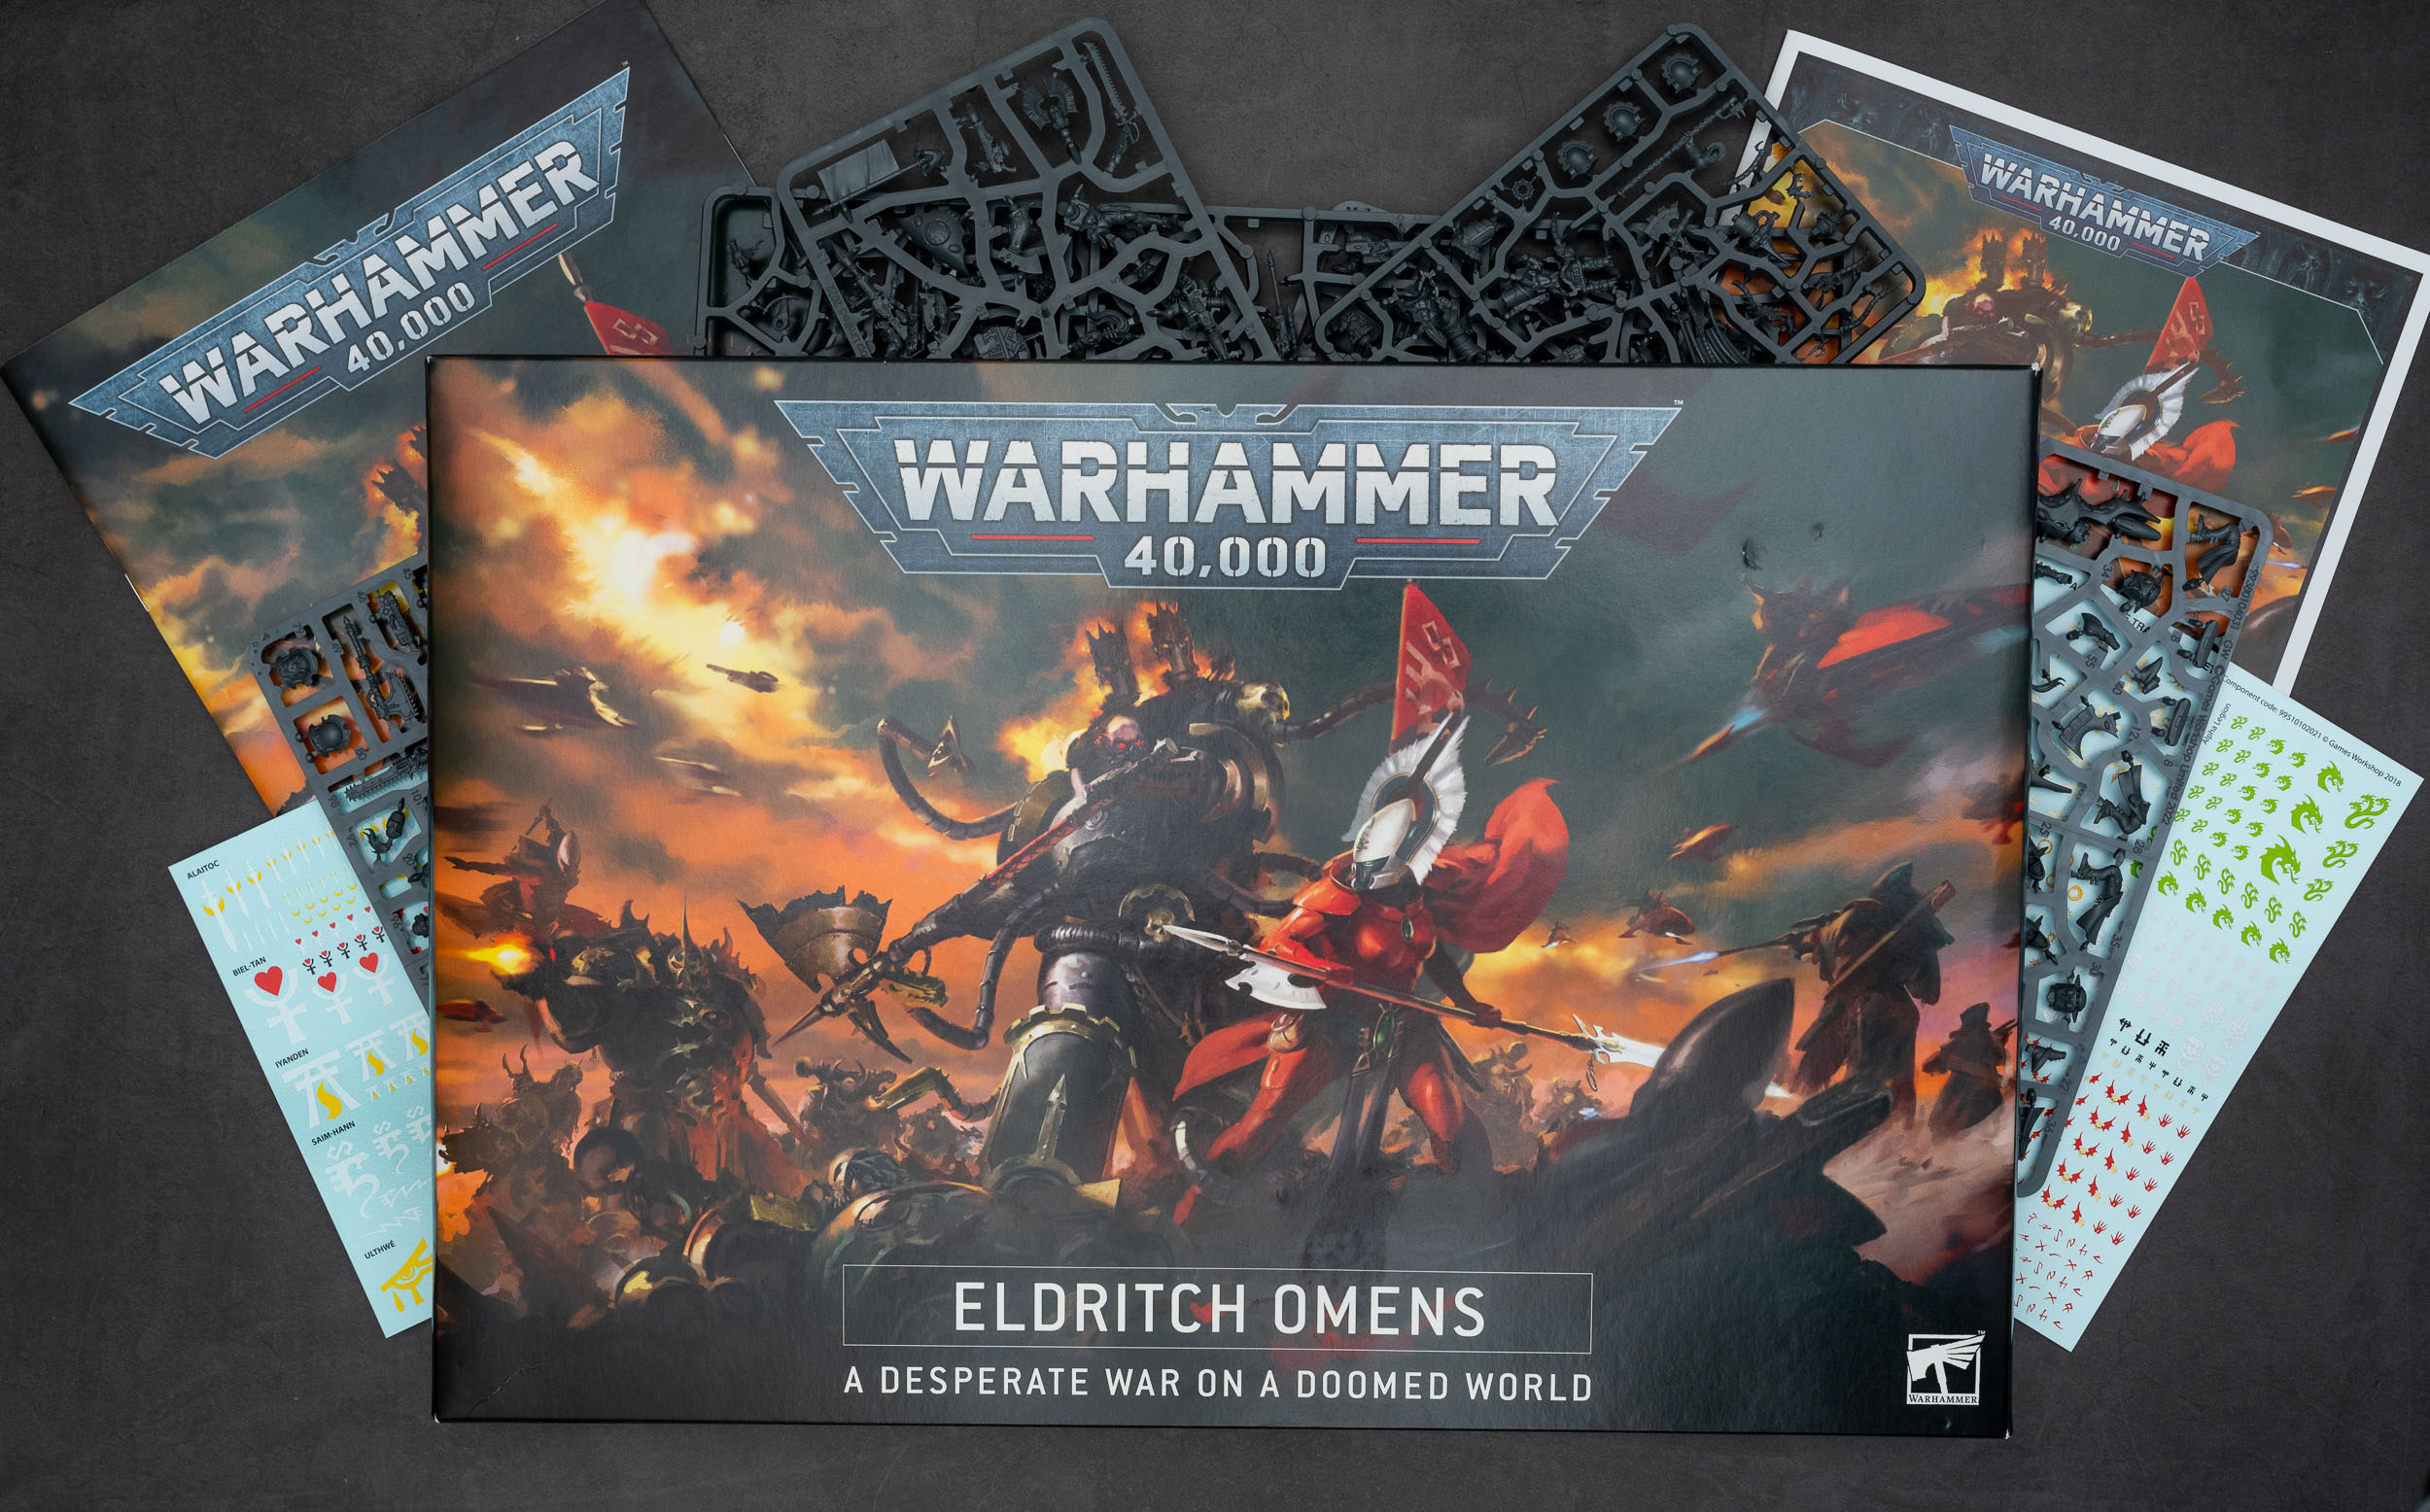 Eldritch Omens 40k review and unboxing